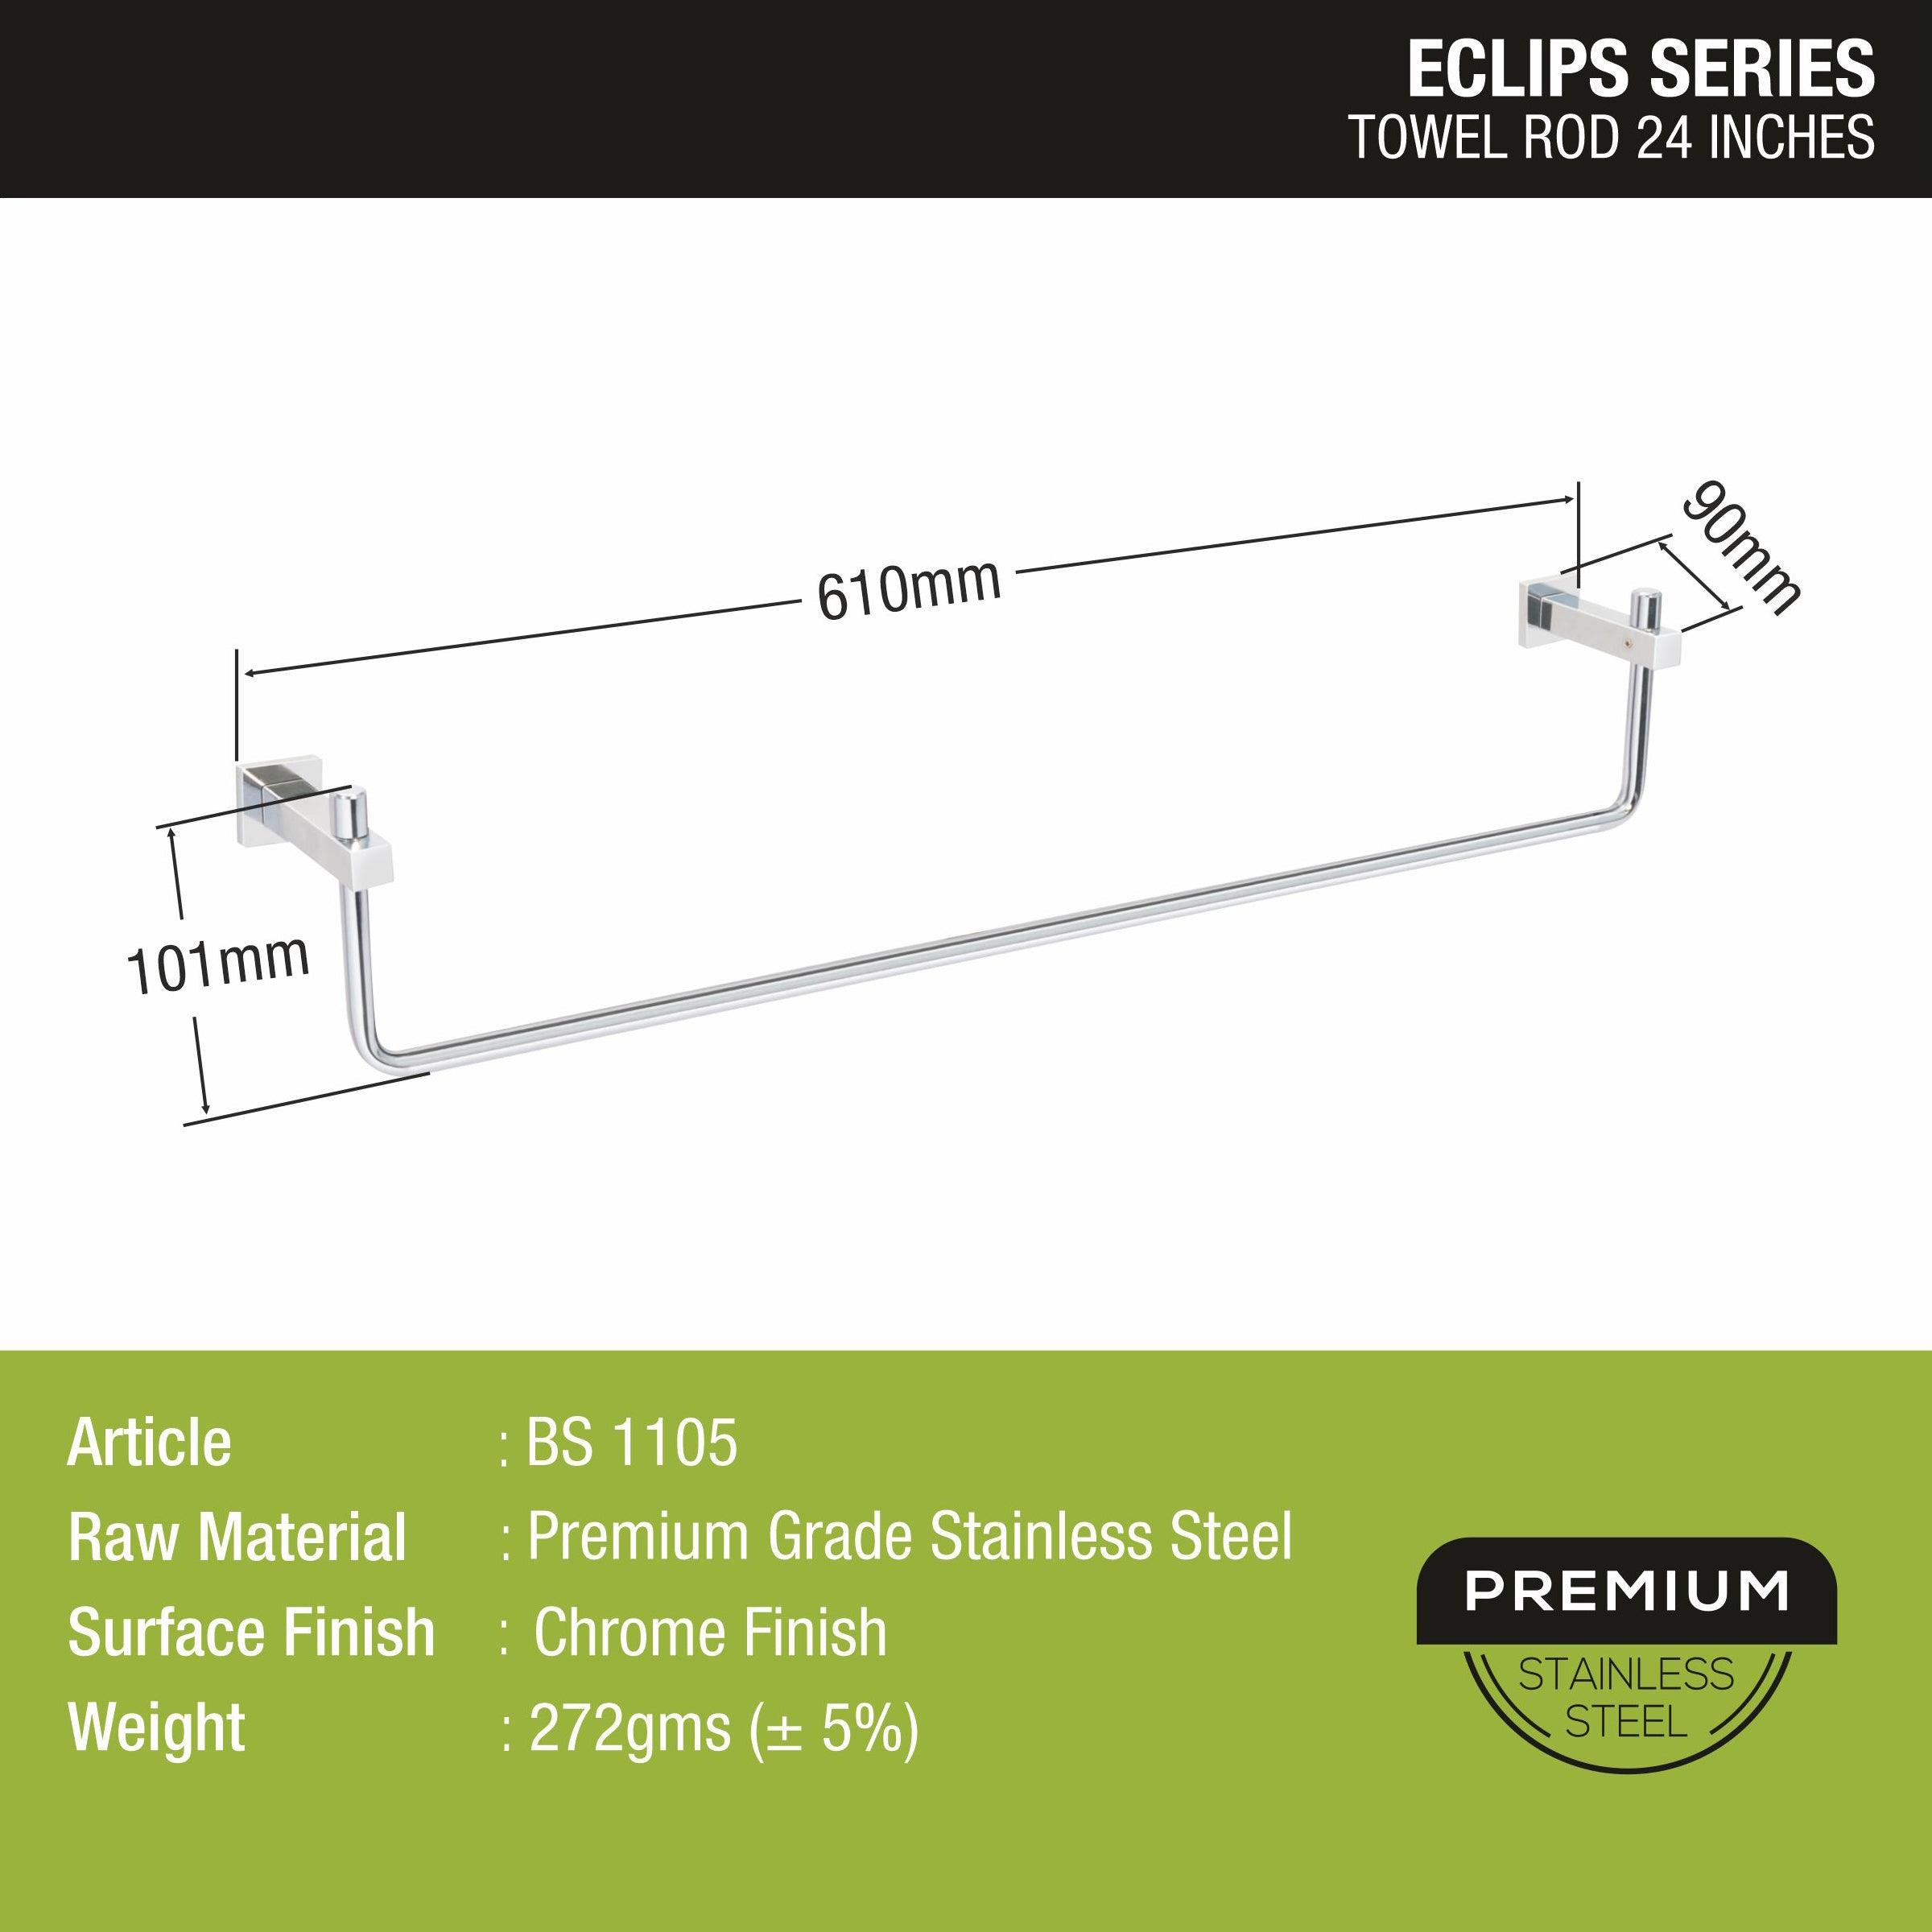 Eclipse Towel Rod (24 Inches) size and dimension